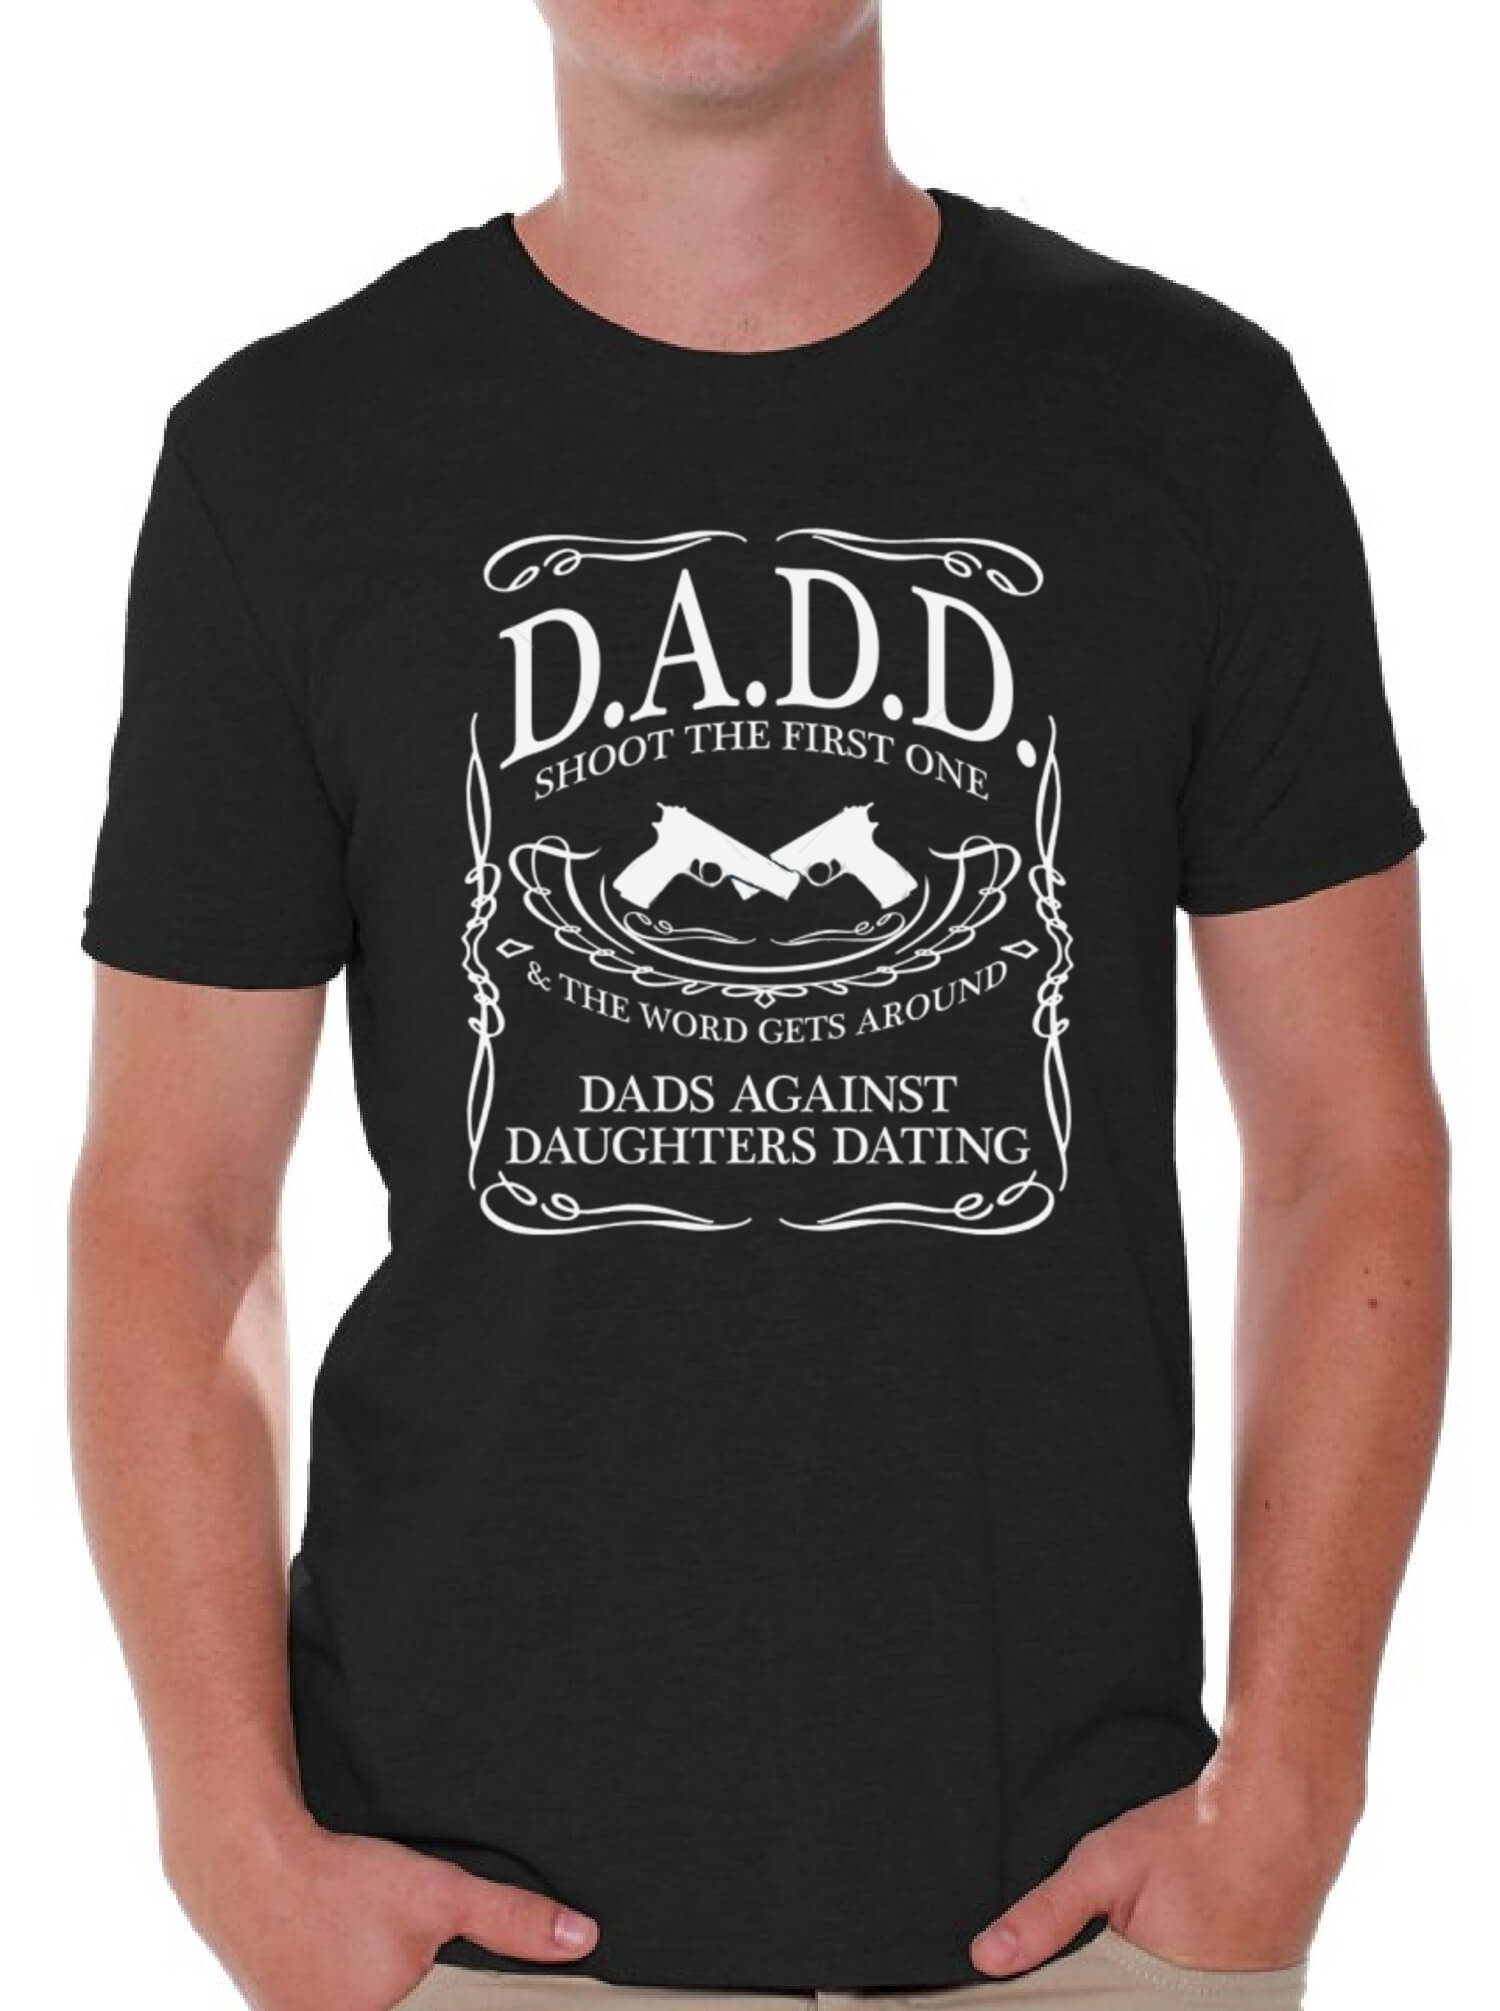 DADD With Guns Dad's T shirt Tops Father`s Day Gift from Daughter | eBay